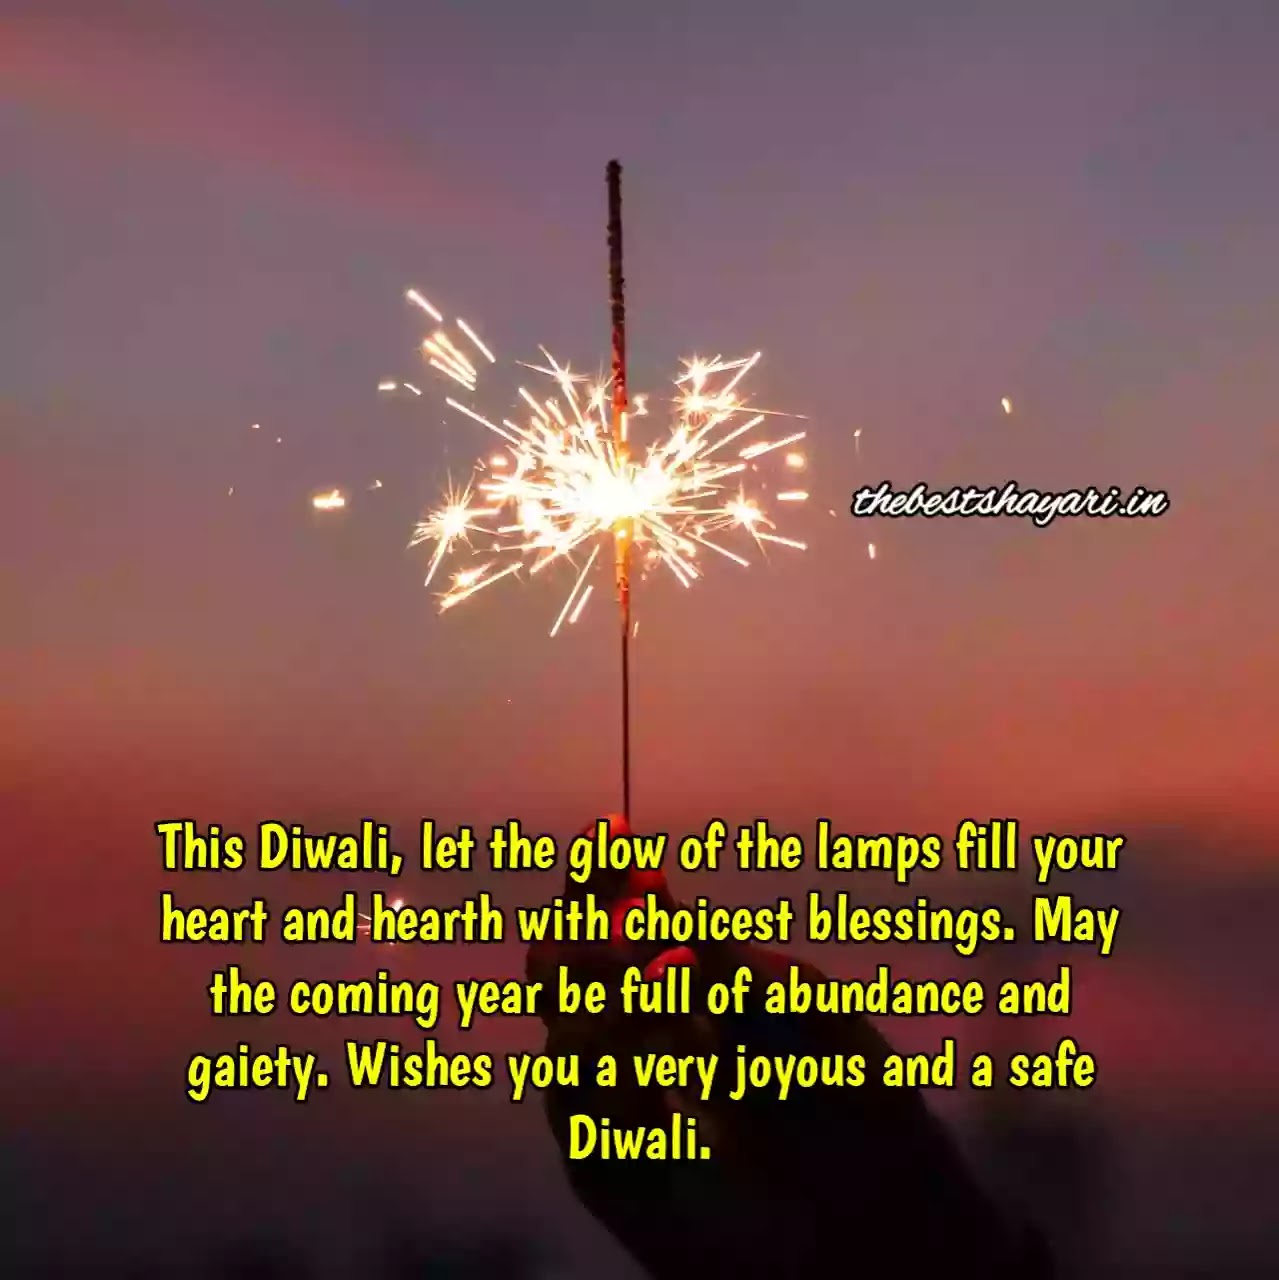 Diwali wishes with pic